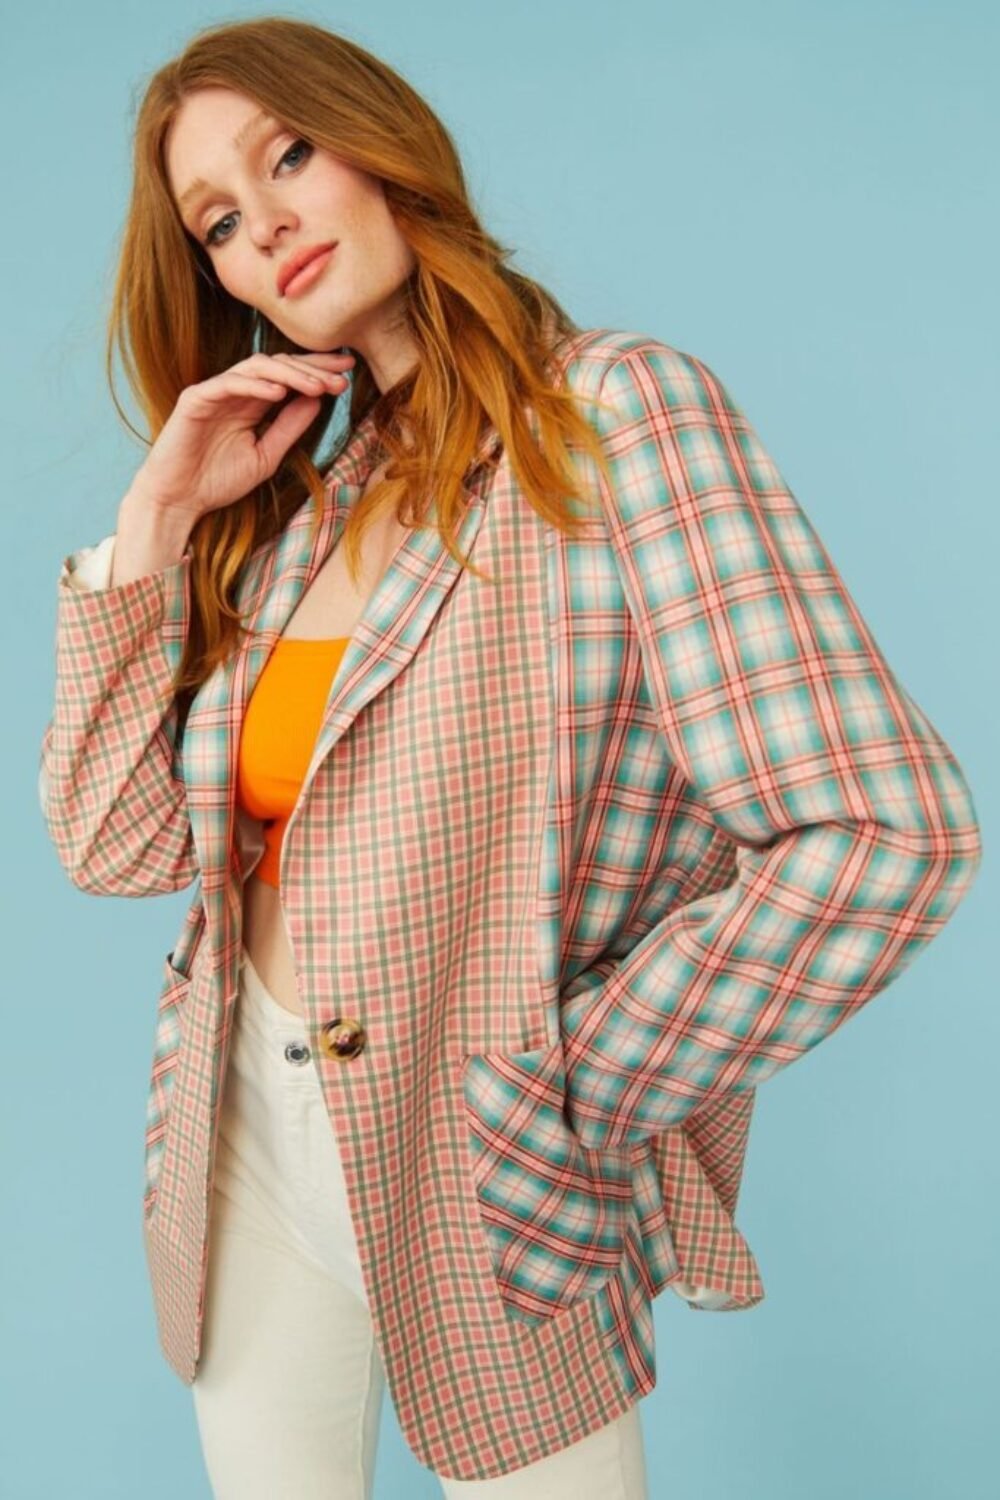 Shop Pink and Teal Check Blazer Jacket and women's luxury and designer clothes at www.lux-apparel.co.uk